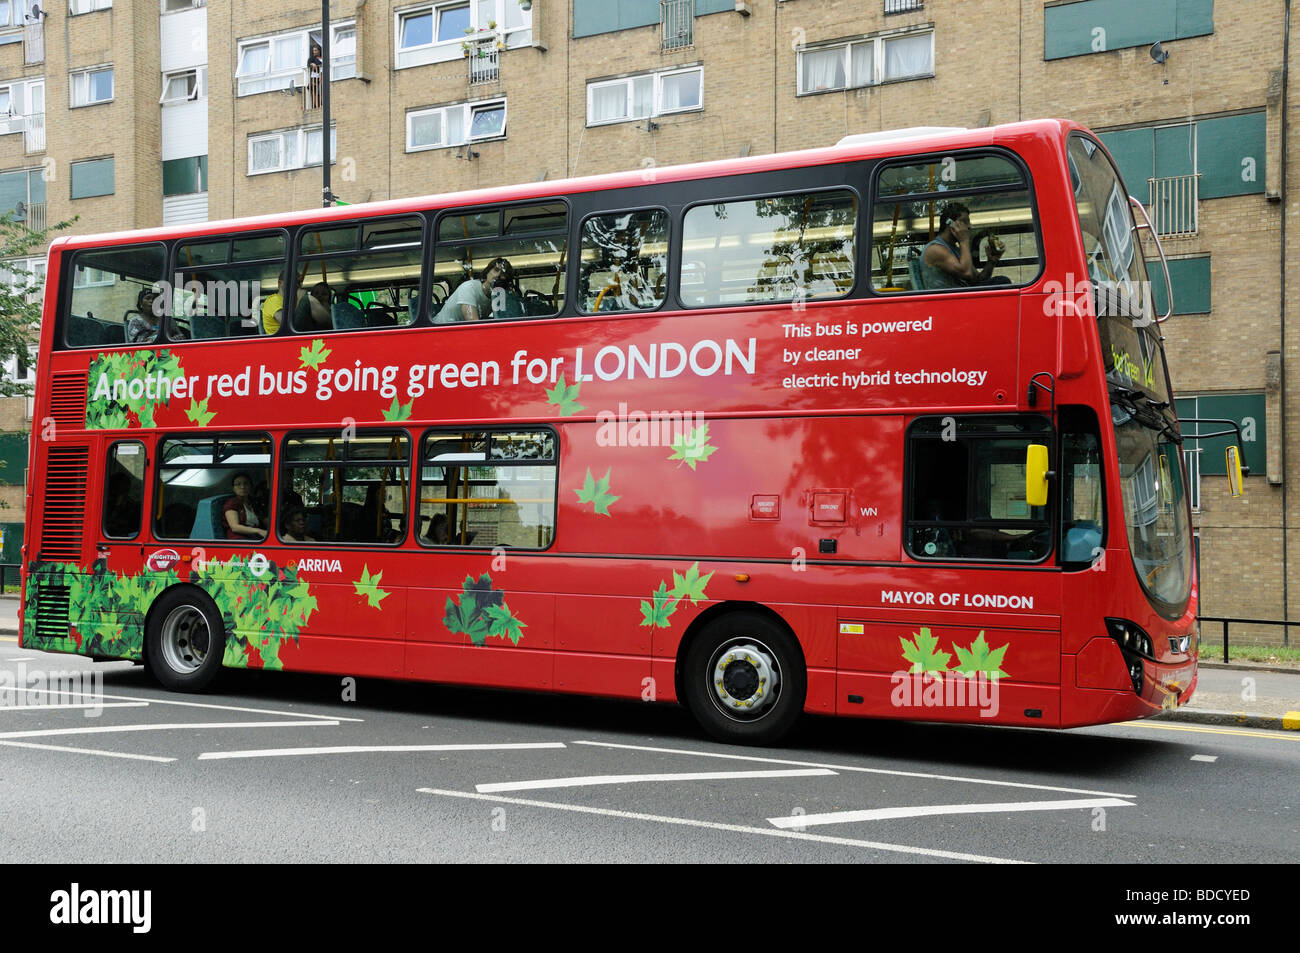 London bus powered by electric hybrid technology with Another red bus going green for London printed on the side England UK Stock Photo